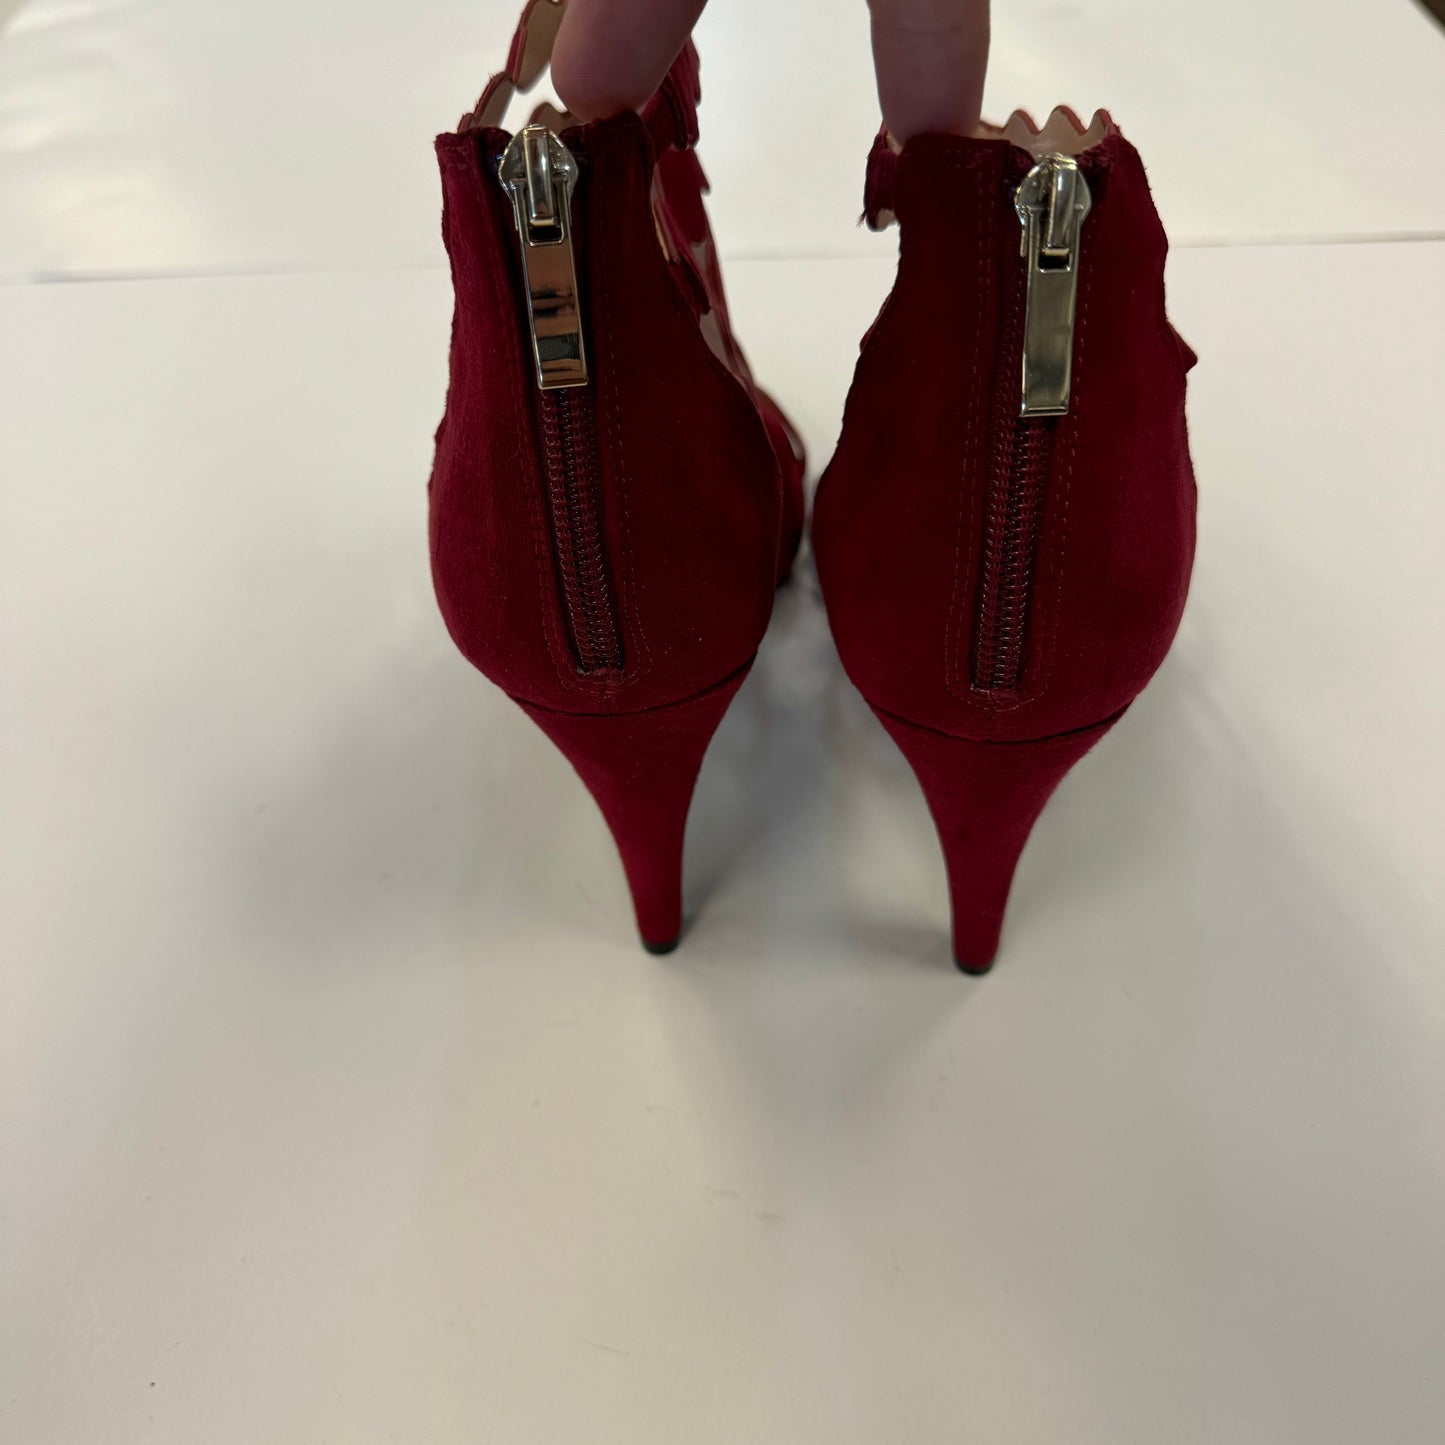 Red Shoes Heels Stiletto Kelly And Katie, Size 9.5